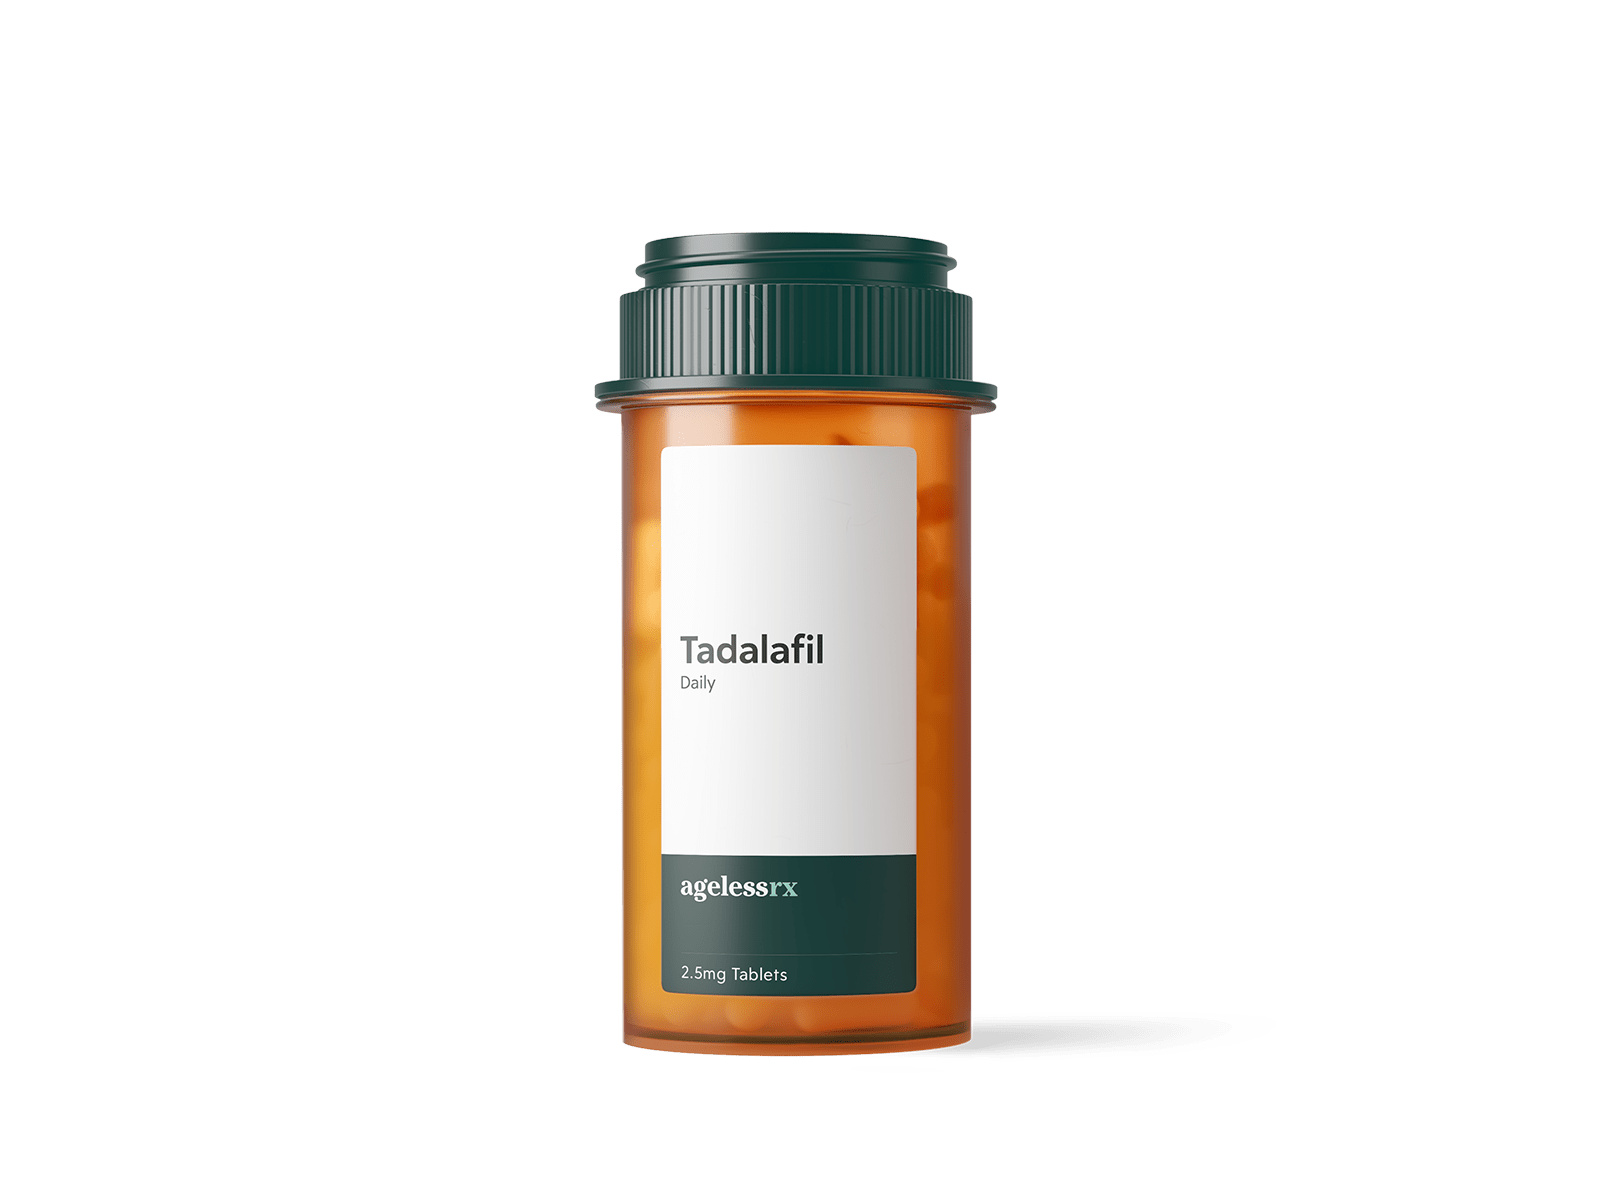 Product image for Tadalafil (Daily)